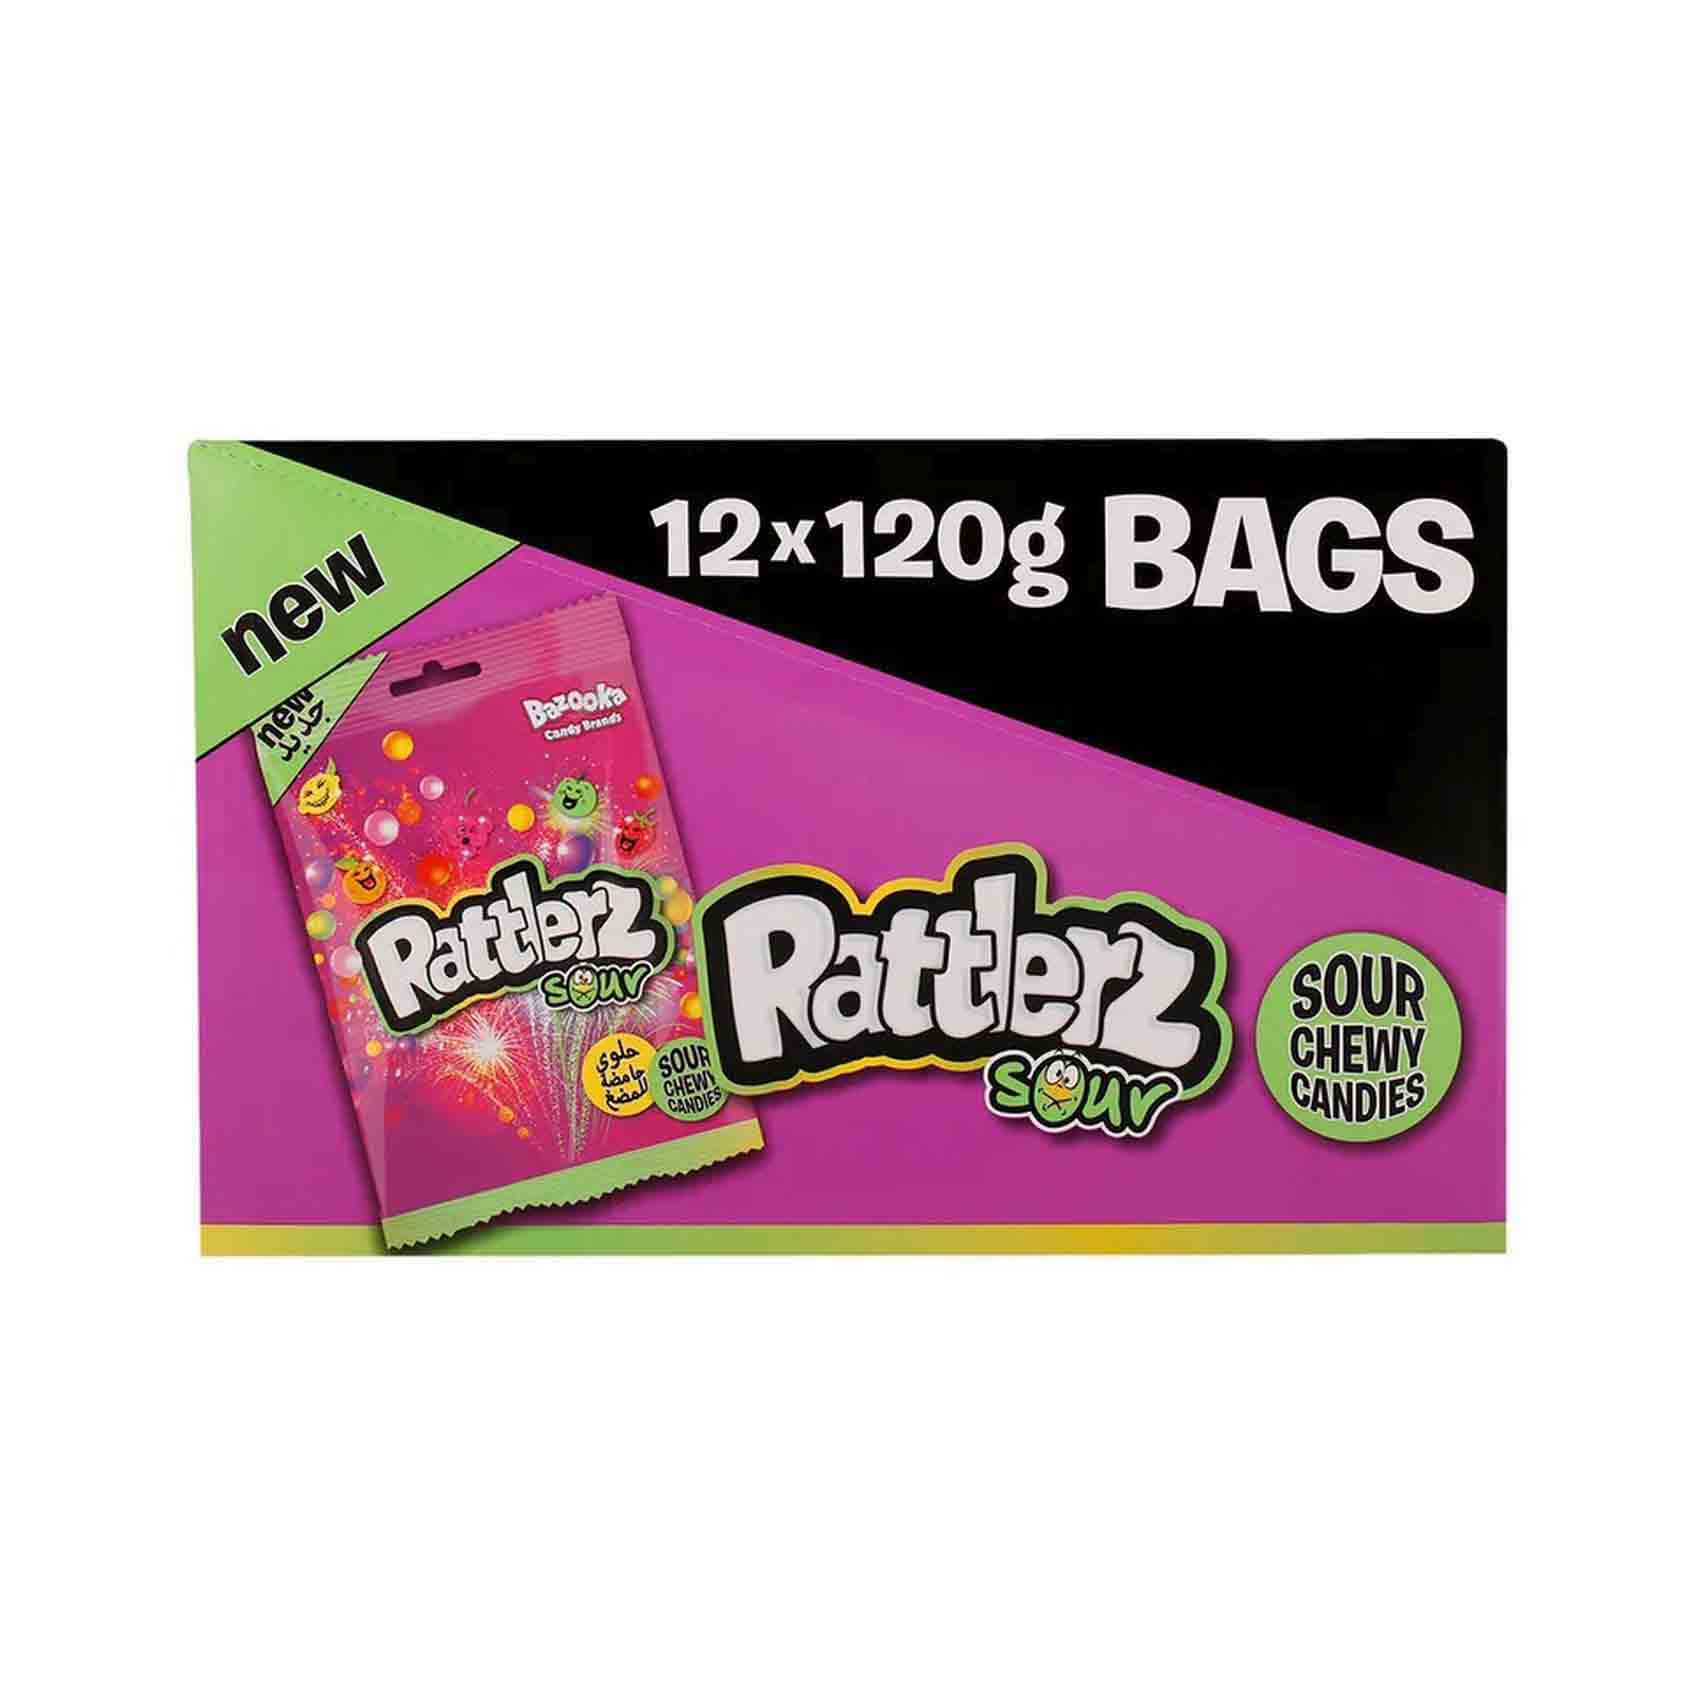 Bazooka Rattlerz Sour Chewy Candy 120g Pack of 12